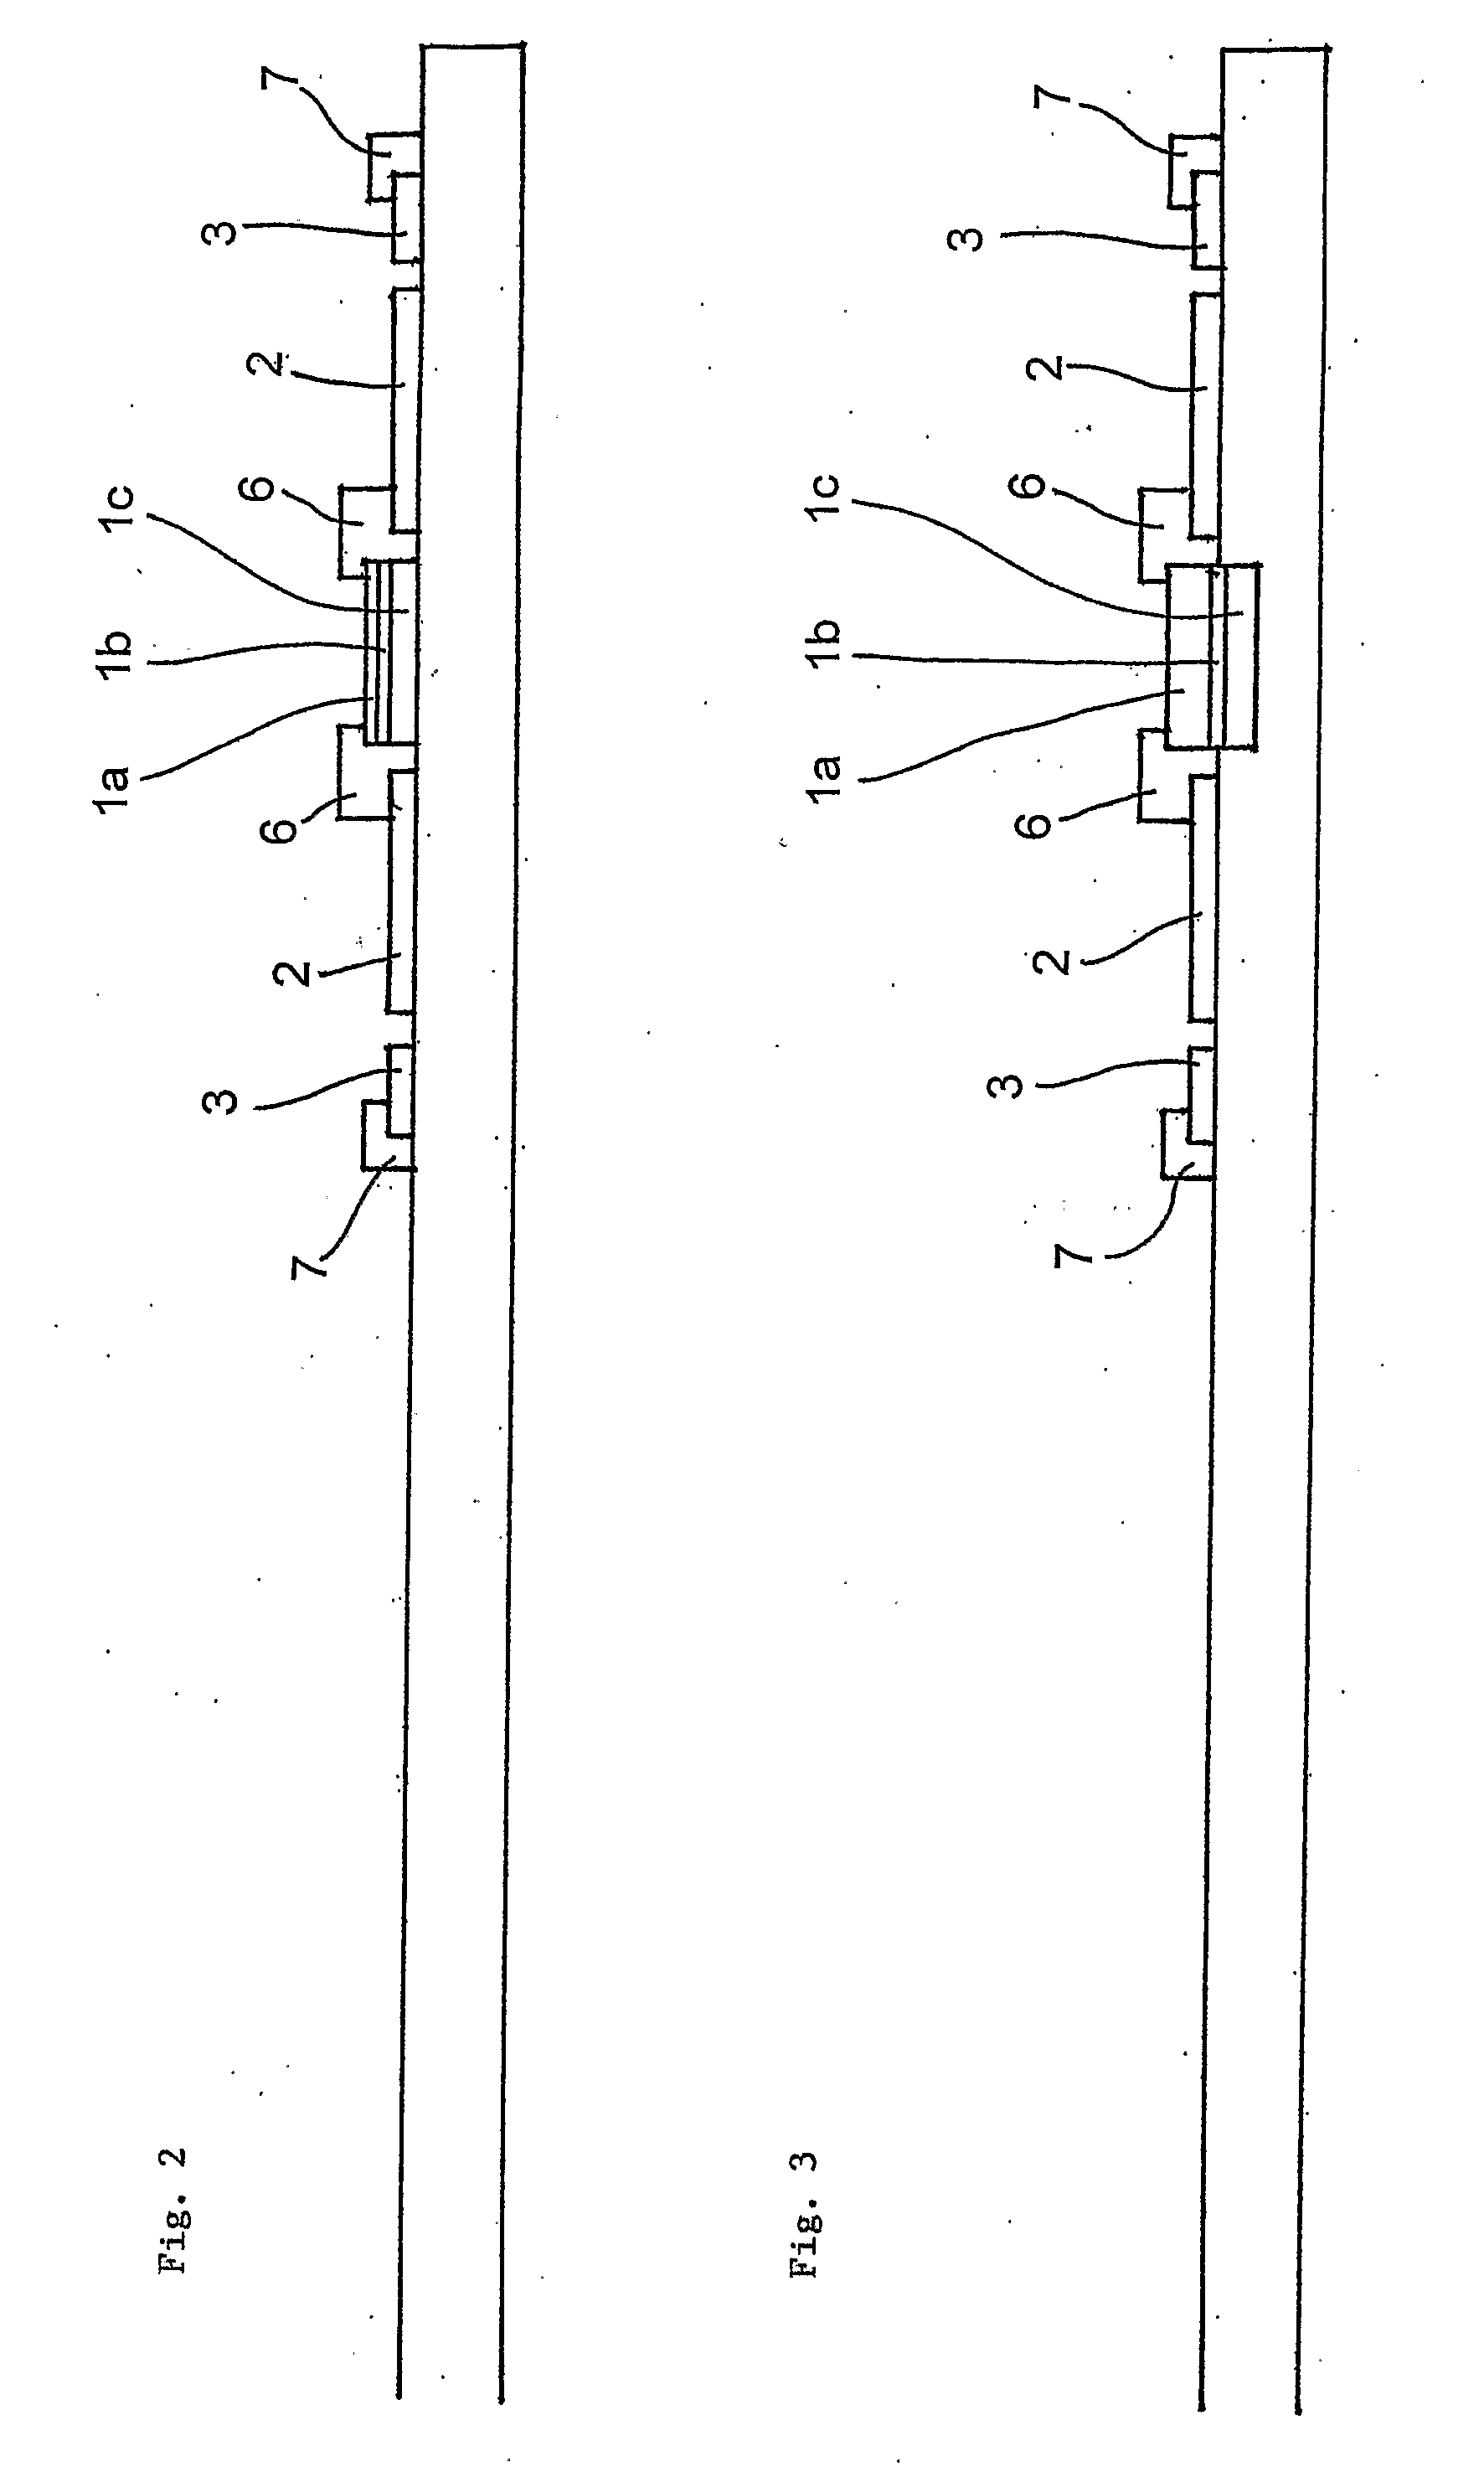 Nanostructured Working Electrode of an Electrochemical Sensor, Method of Manufacturing Thereof and Sensor Containing This Working Electrode